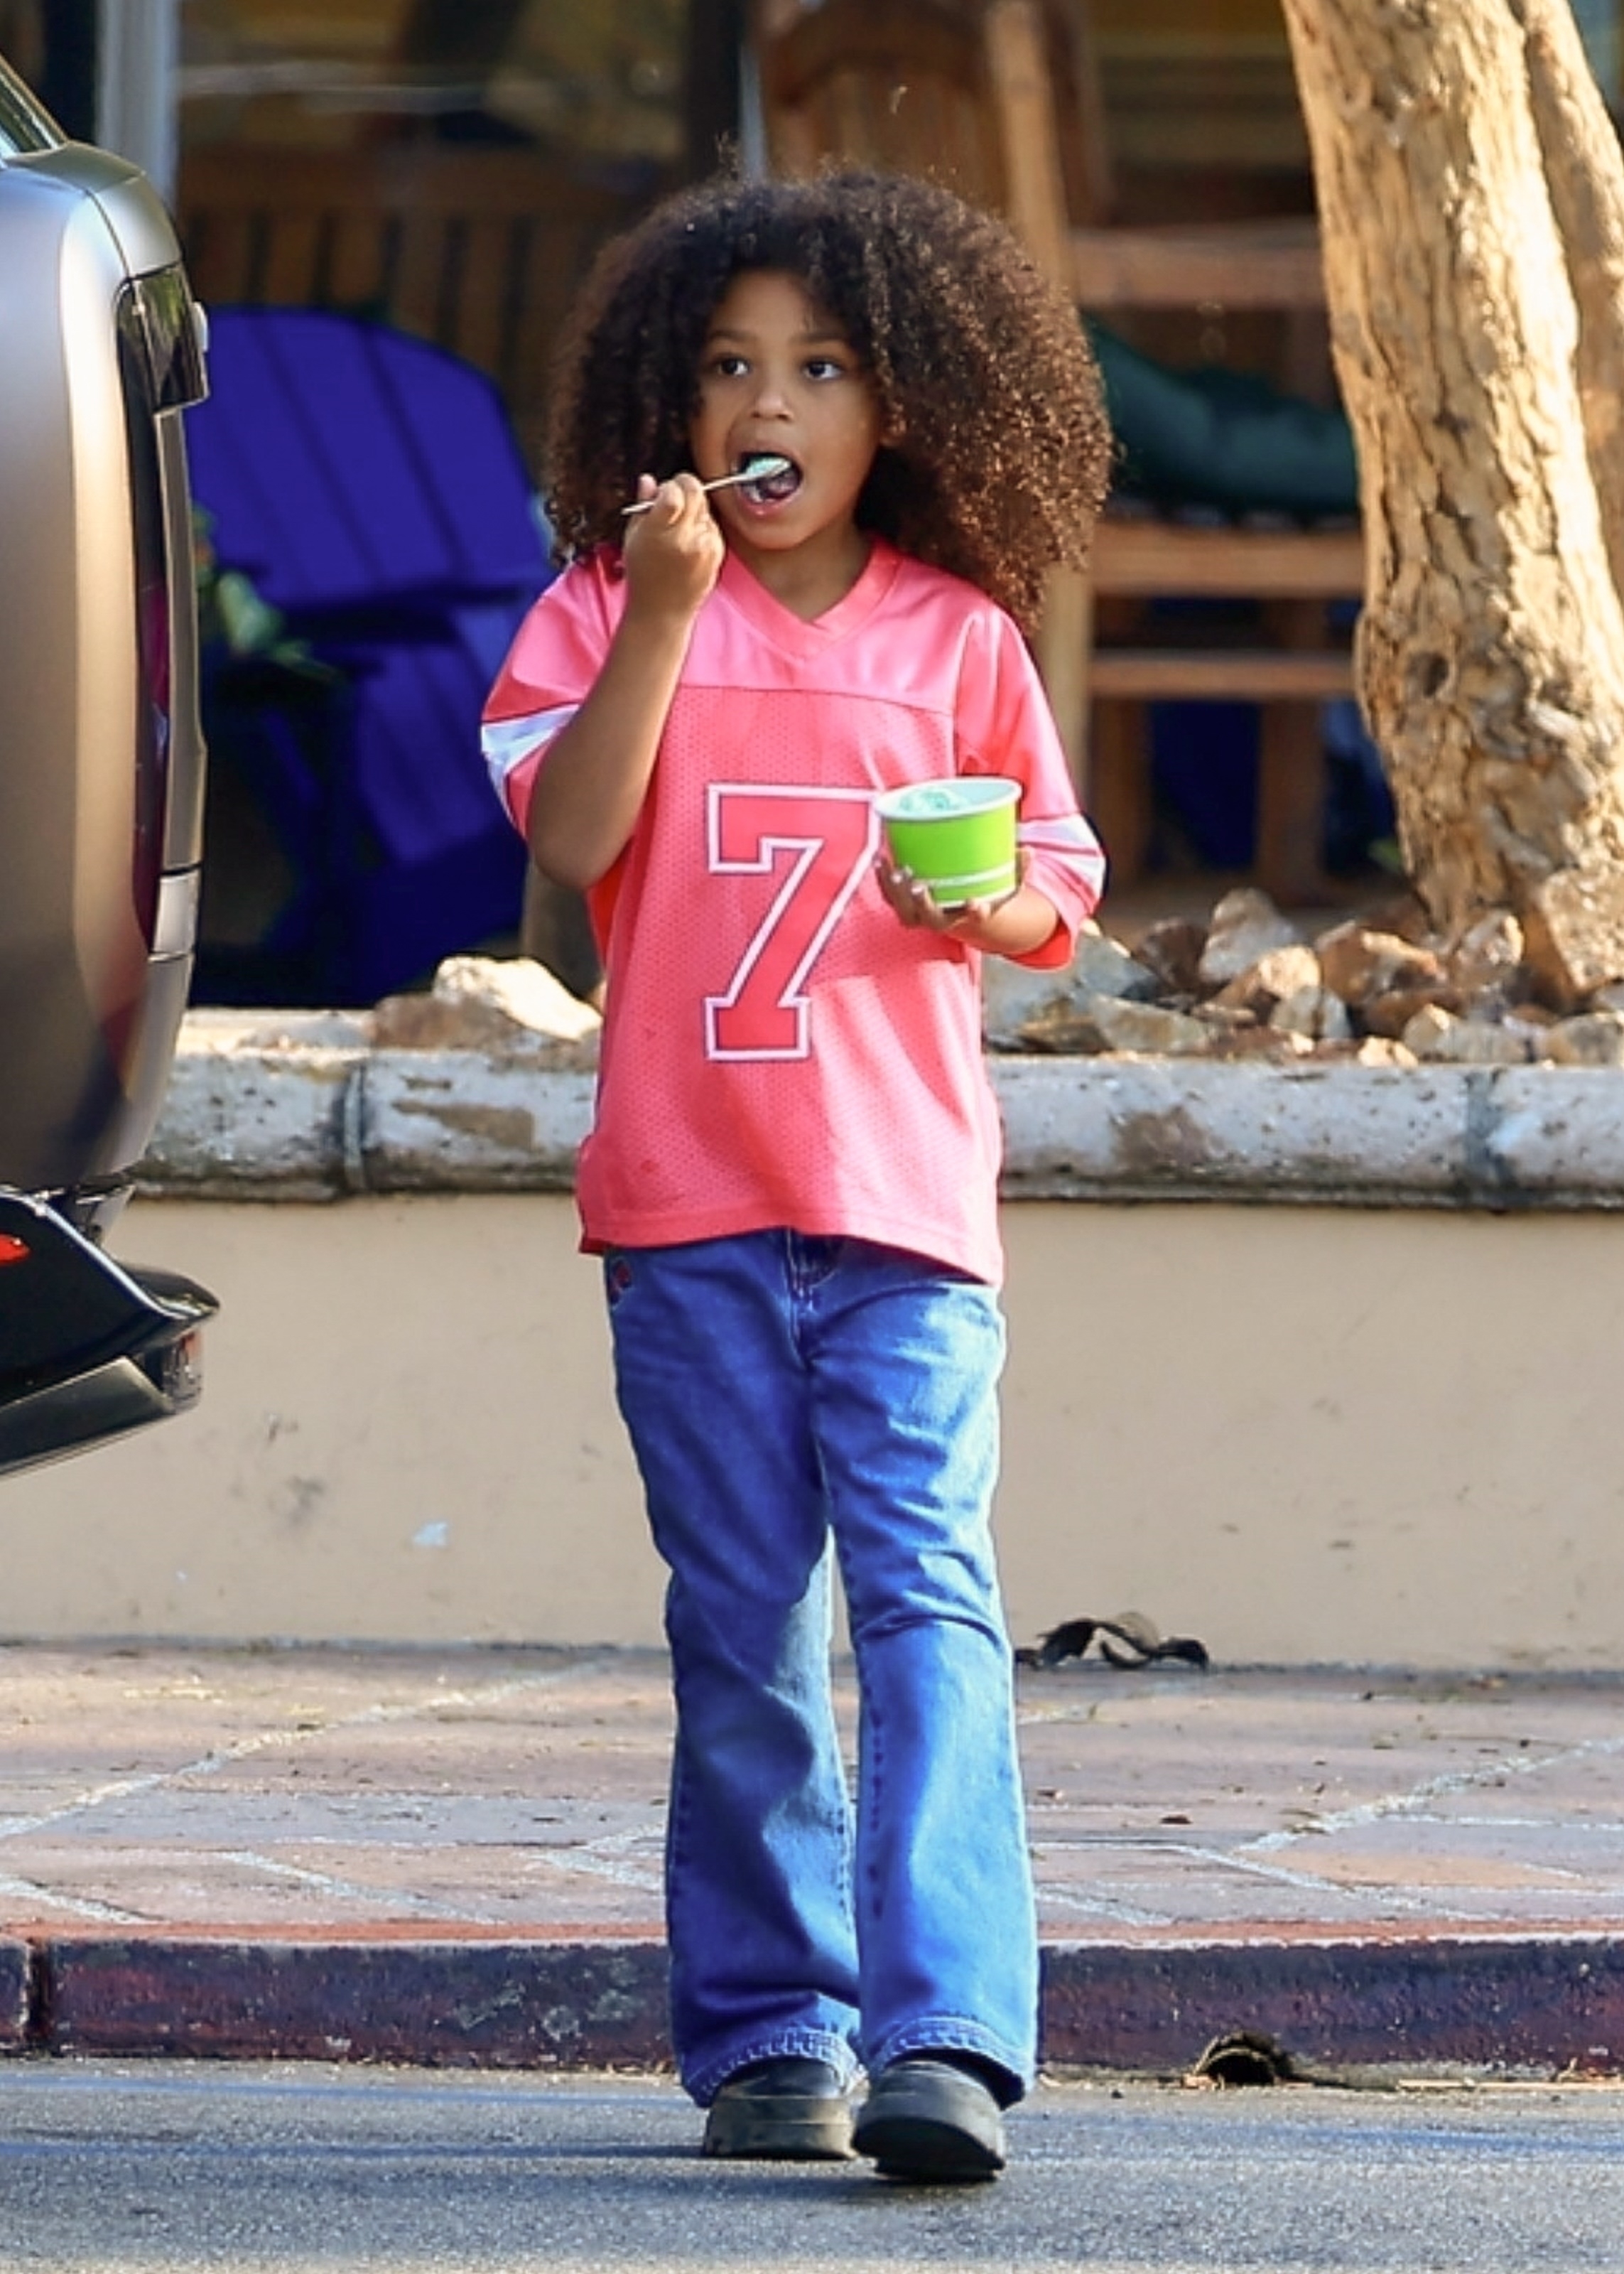 Stormi Webster takes a bite of ice cream as she enjoys a mommy-and-me outing with Kylie Jenner; Aire Webster was not spotted with his mom or sister